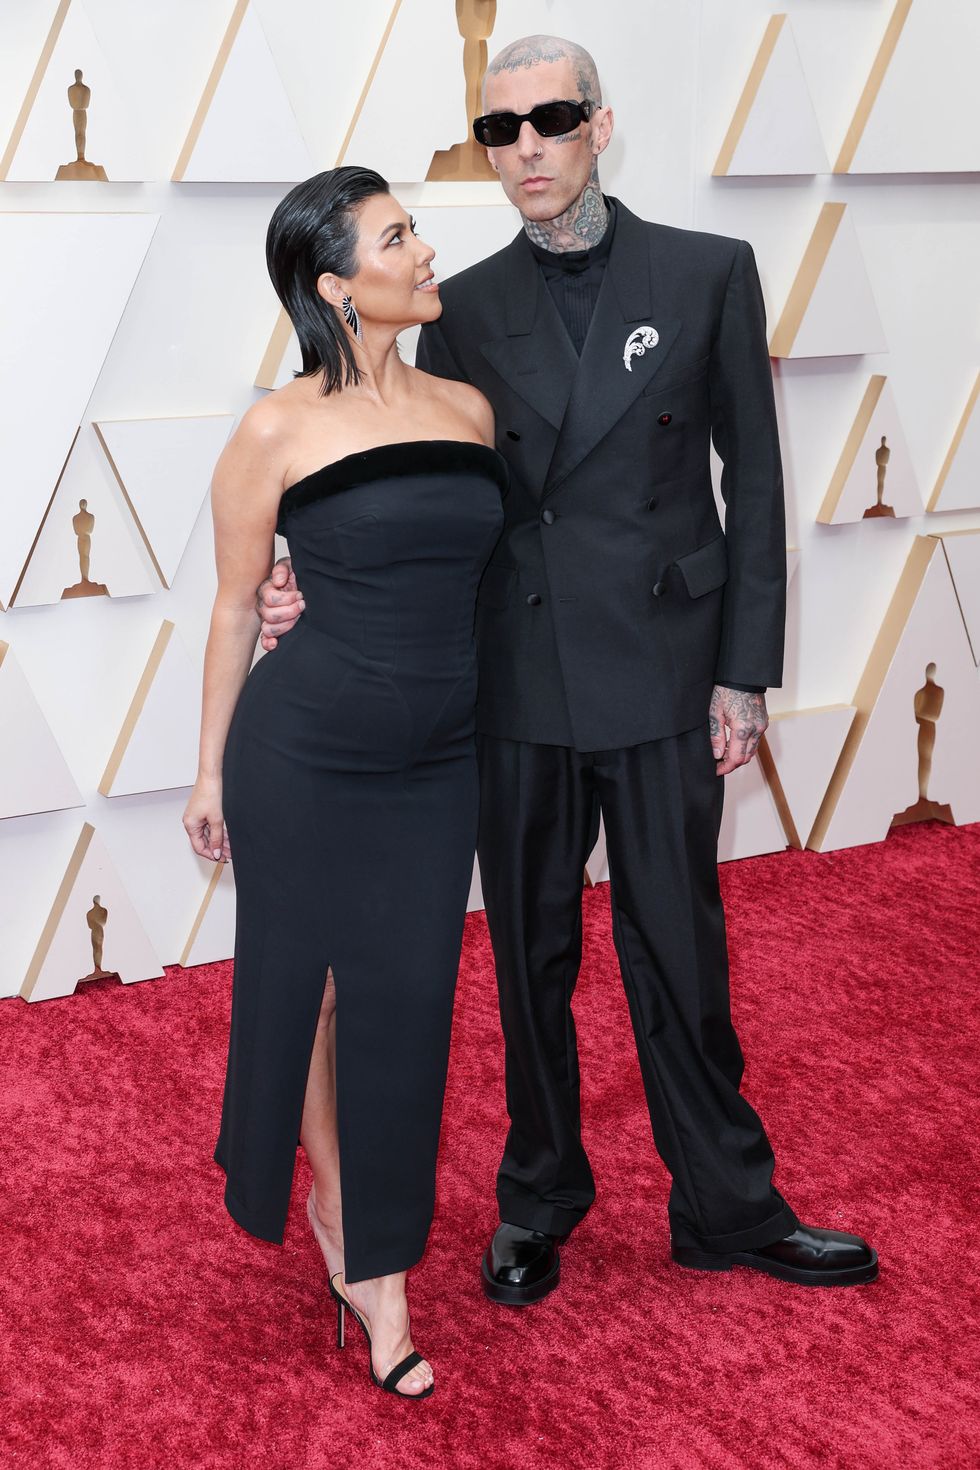 hollywood, california   march 27 l r kourtney kardashian and travis barker attend the 94th annual academy awards at hollywood and highland on march 27, 2022 in hollywood, california  jay l clendenin  los angeles times via getty images